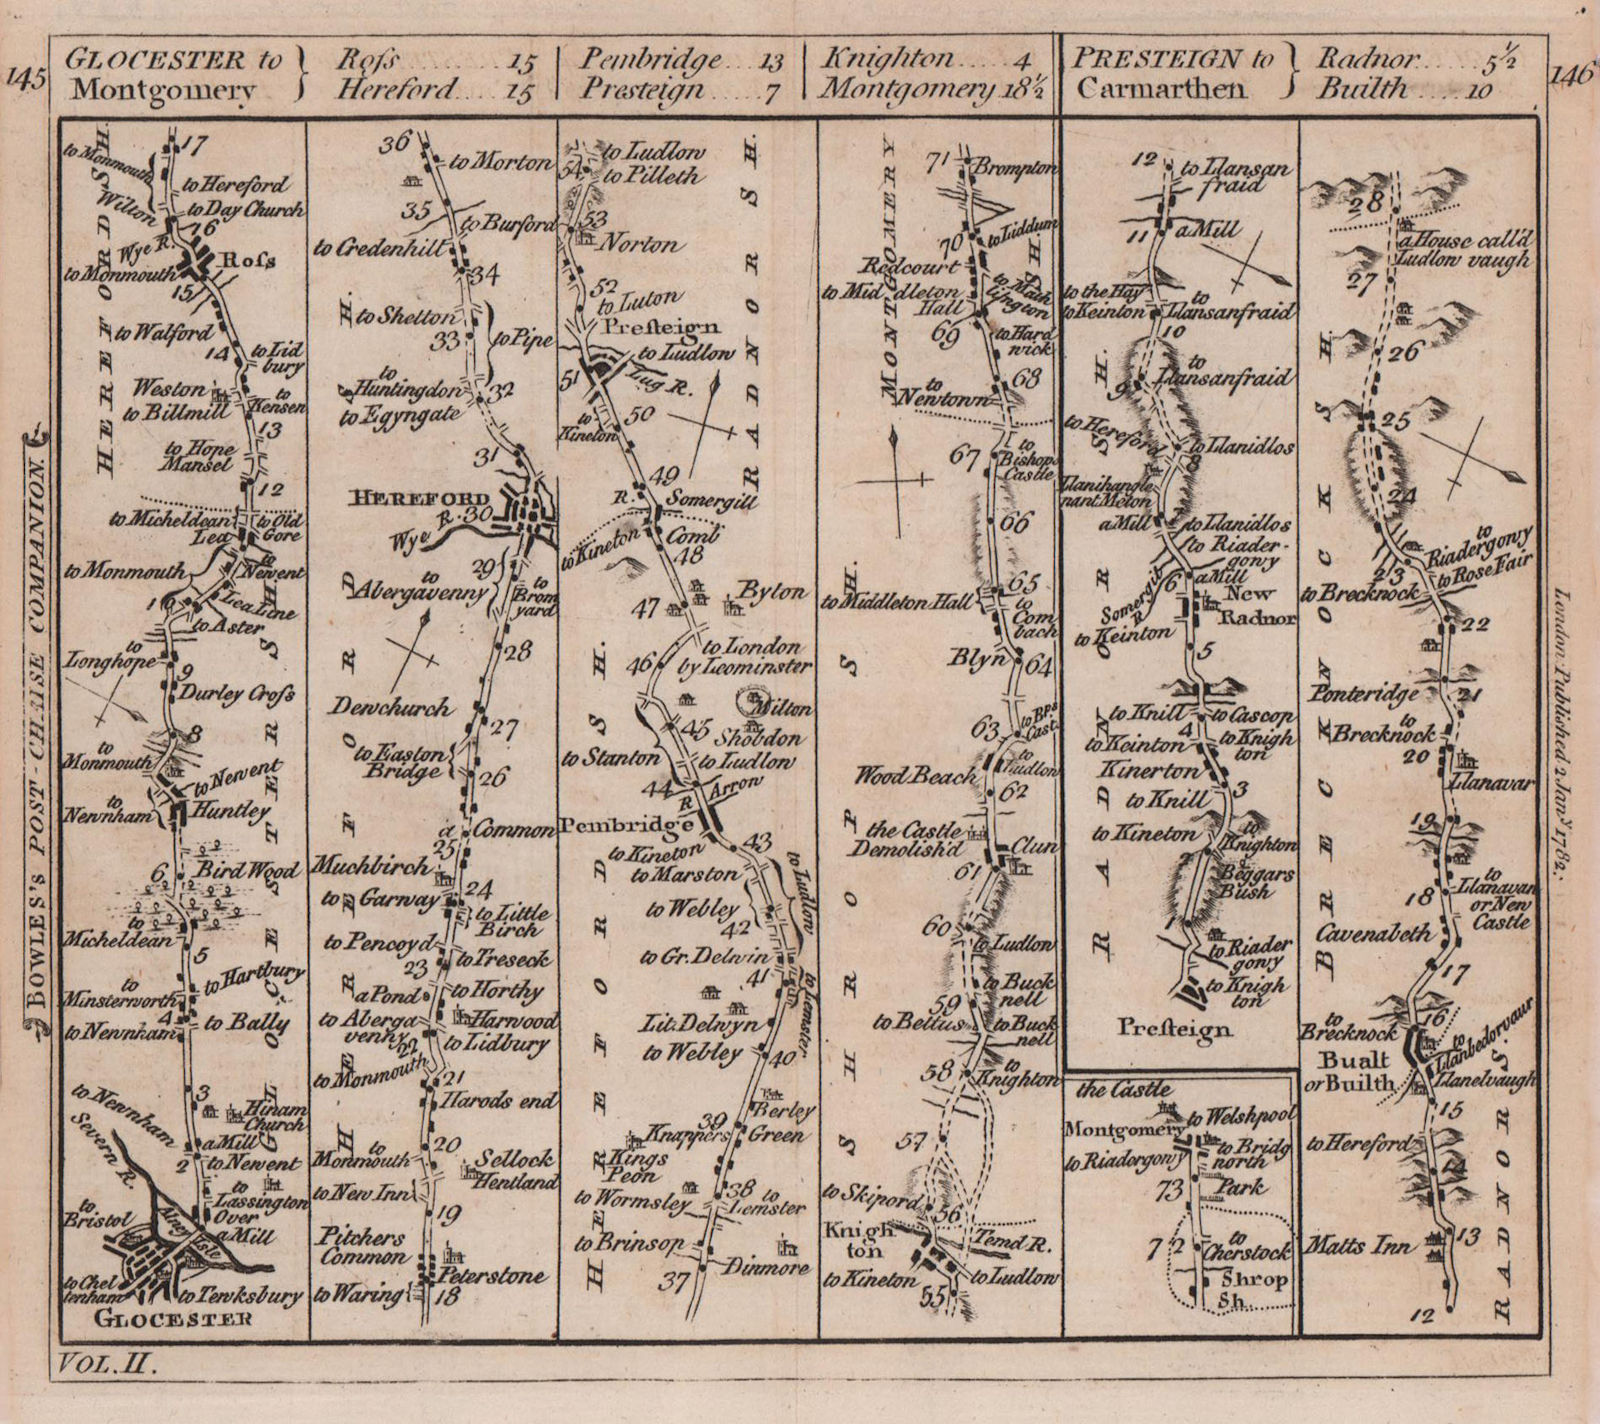 Associate Product Gloucester-Hereford-Montgomery. Presteigne-Builth road strip map BOWLES 1782